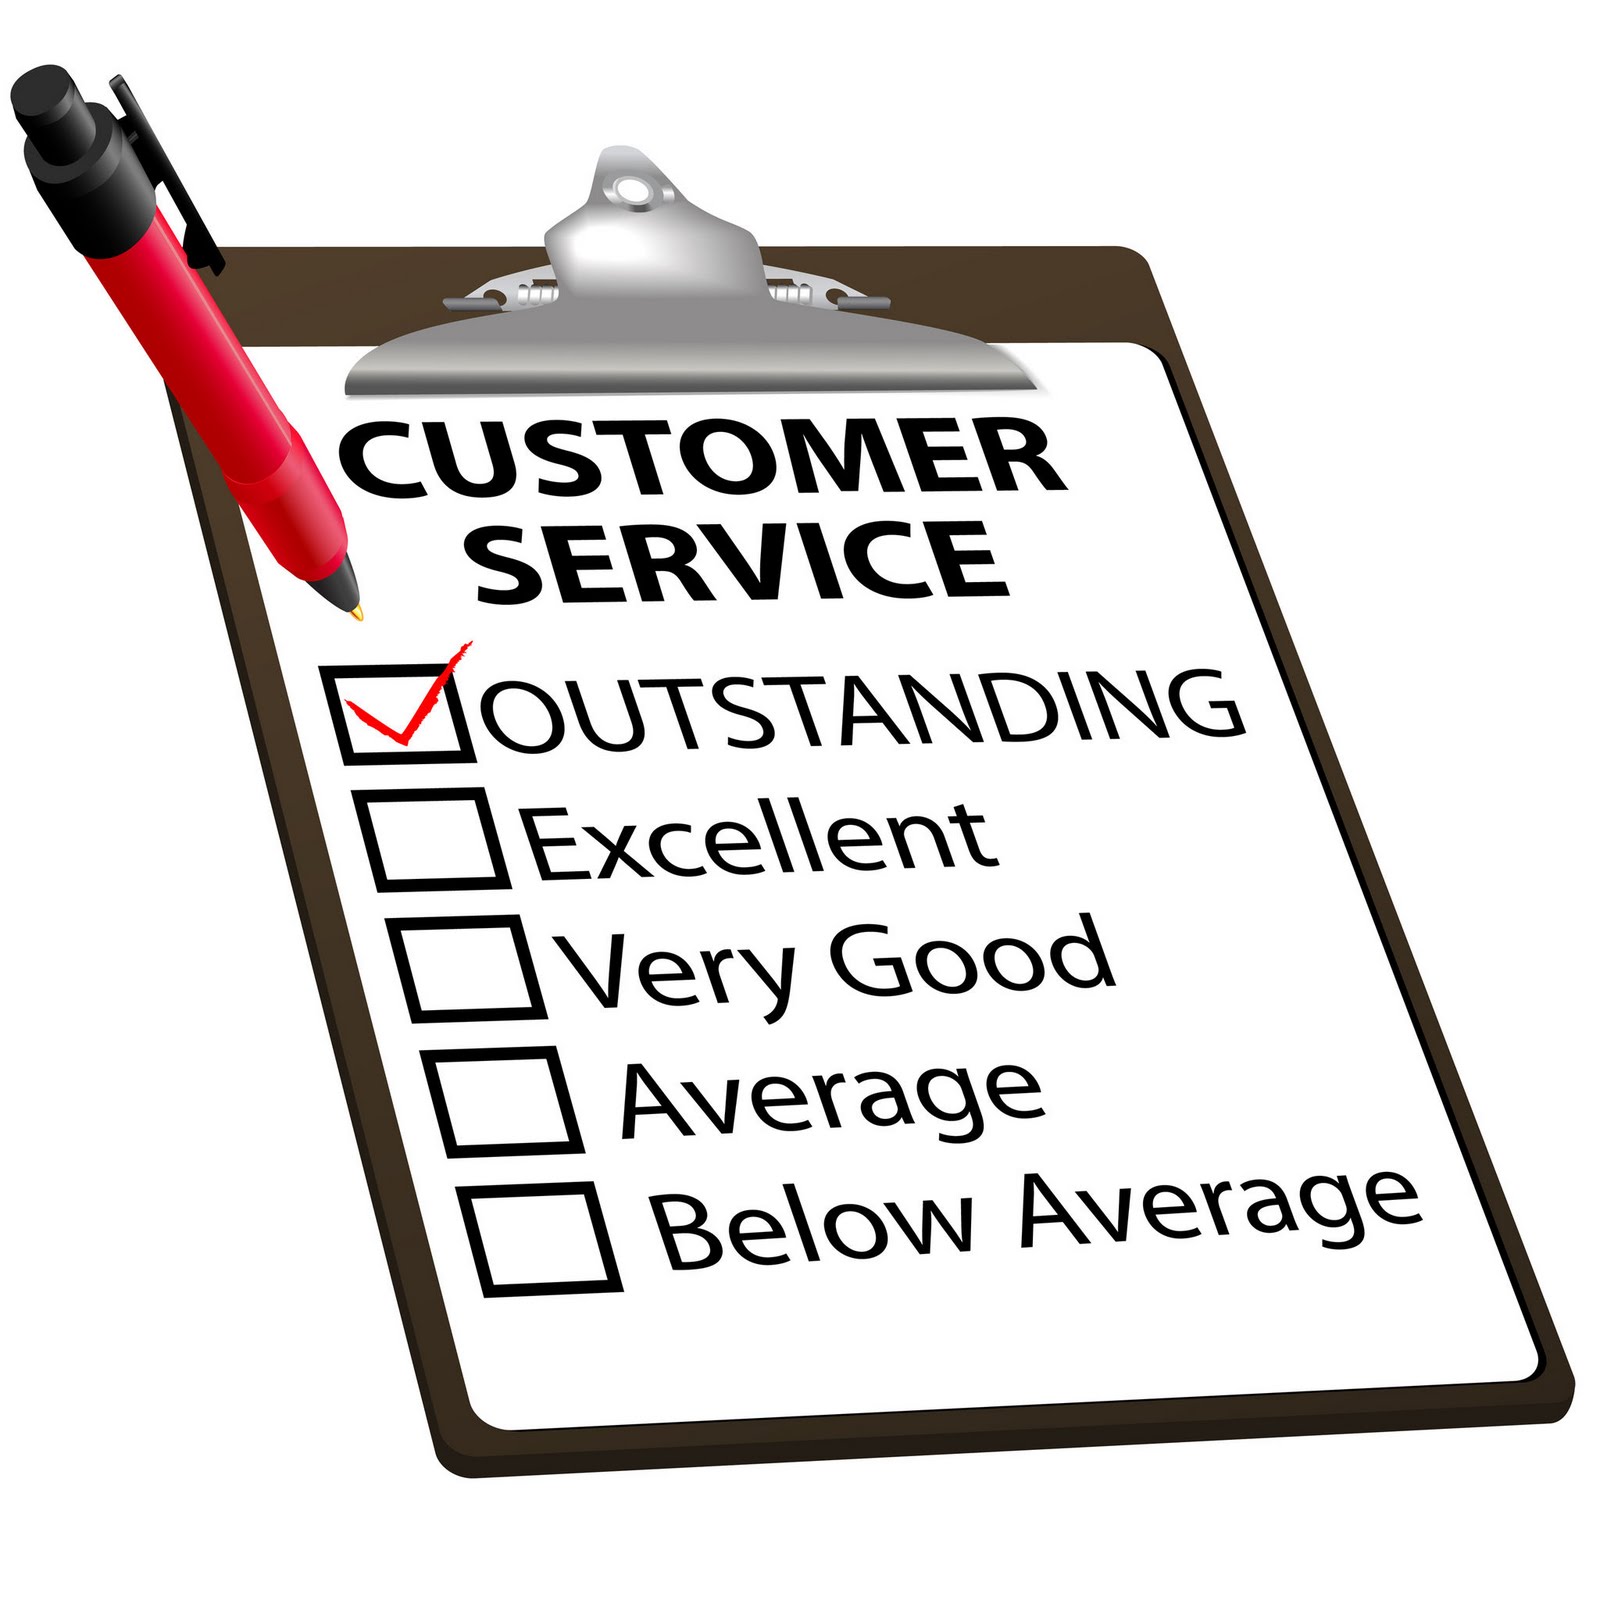 Acf Consulting Blog  The Art Of Customer Service